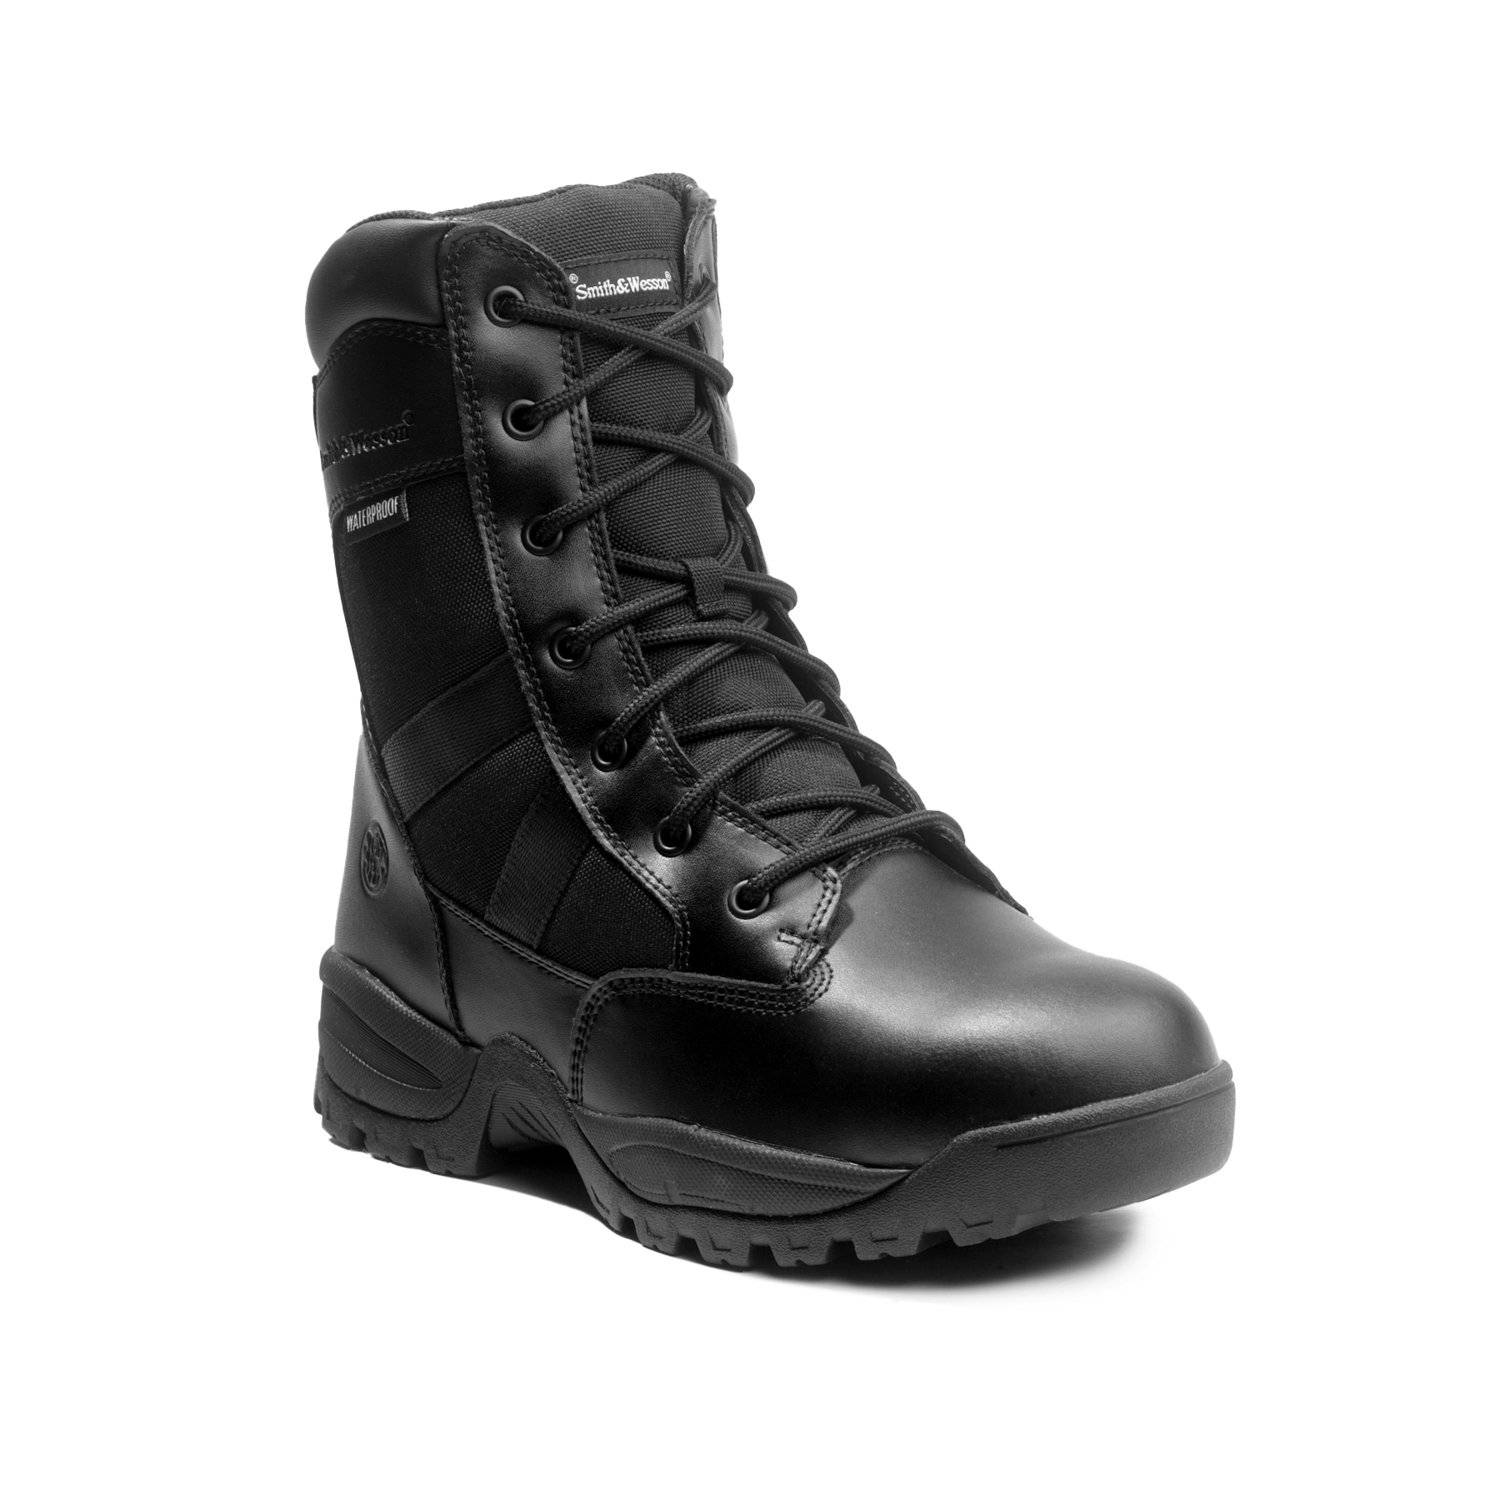 SMITH & WESSON BREACH 2.0 8" SIDE ZIP WATERPROOF BOOTS